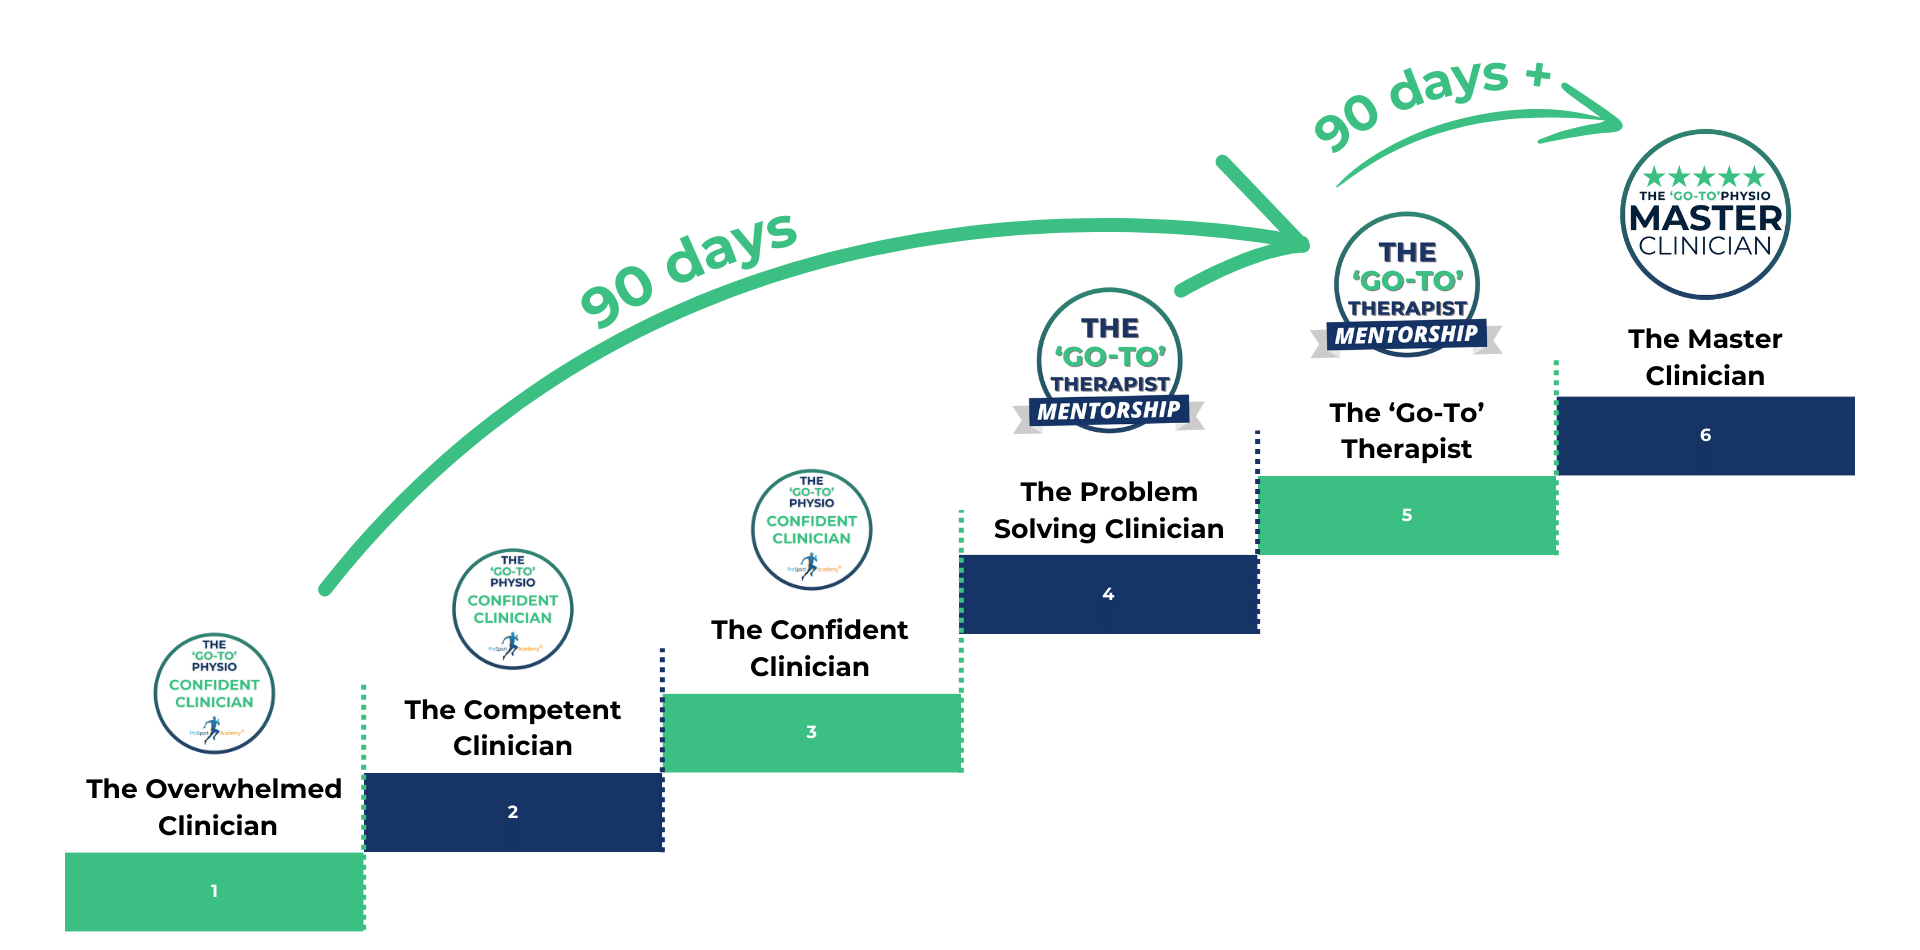 The Go-To Therapist Mentorship Program showing the steps from the overwhelmed clinician to the master clinician